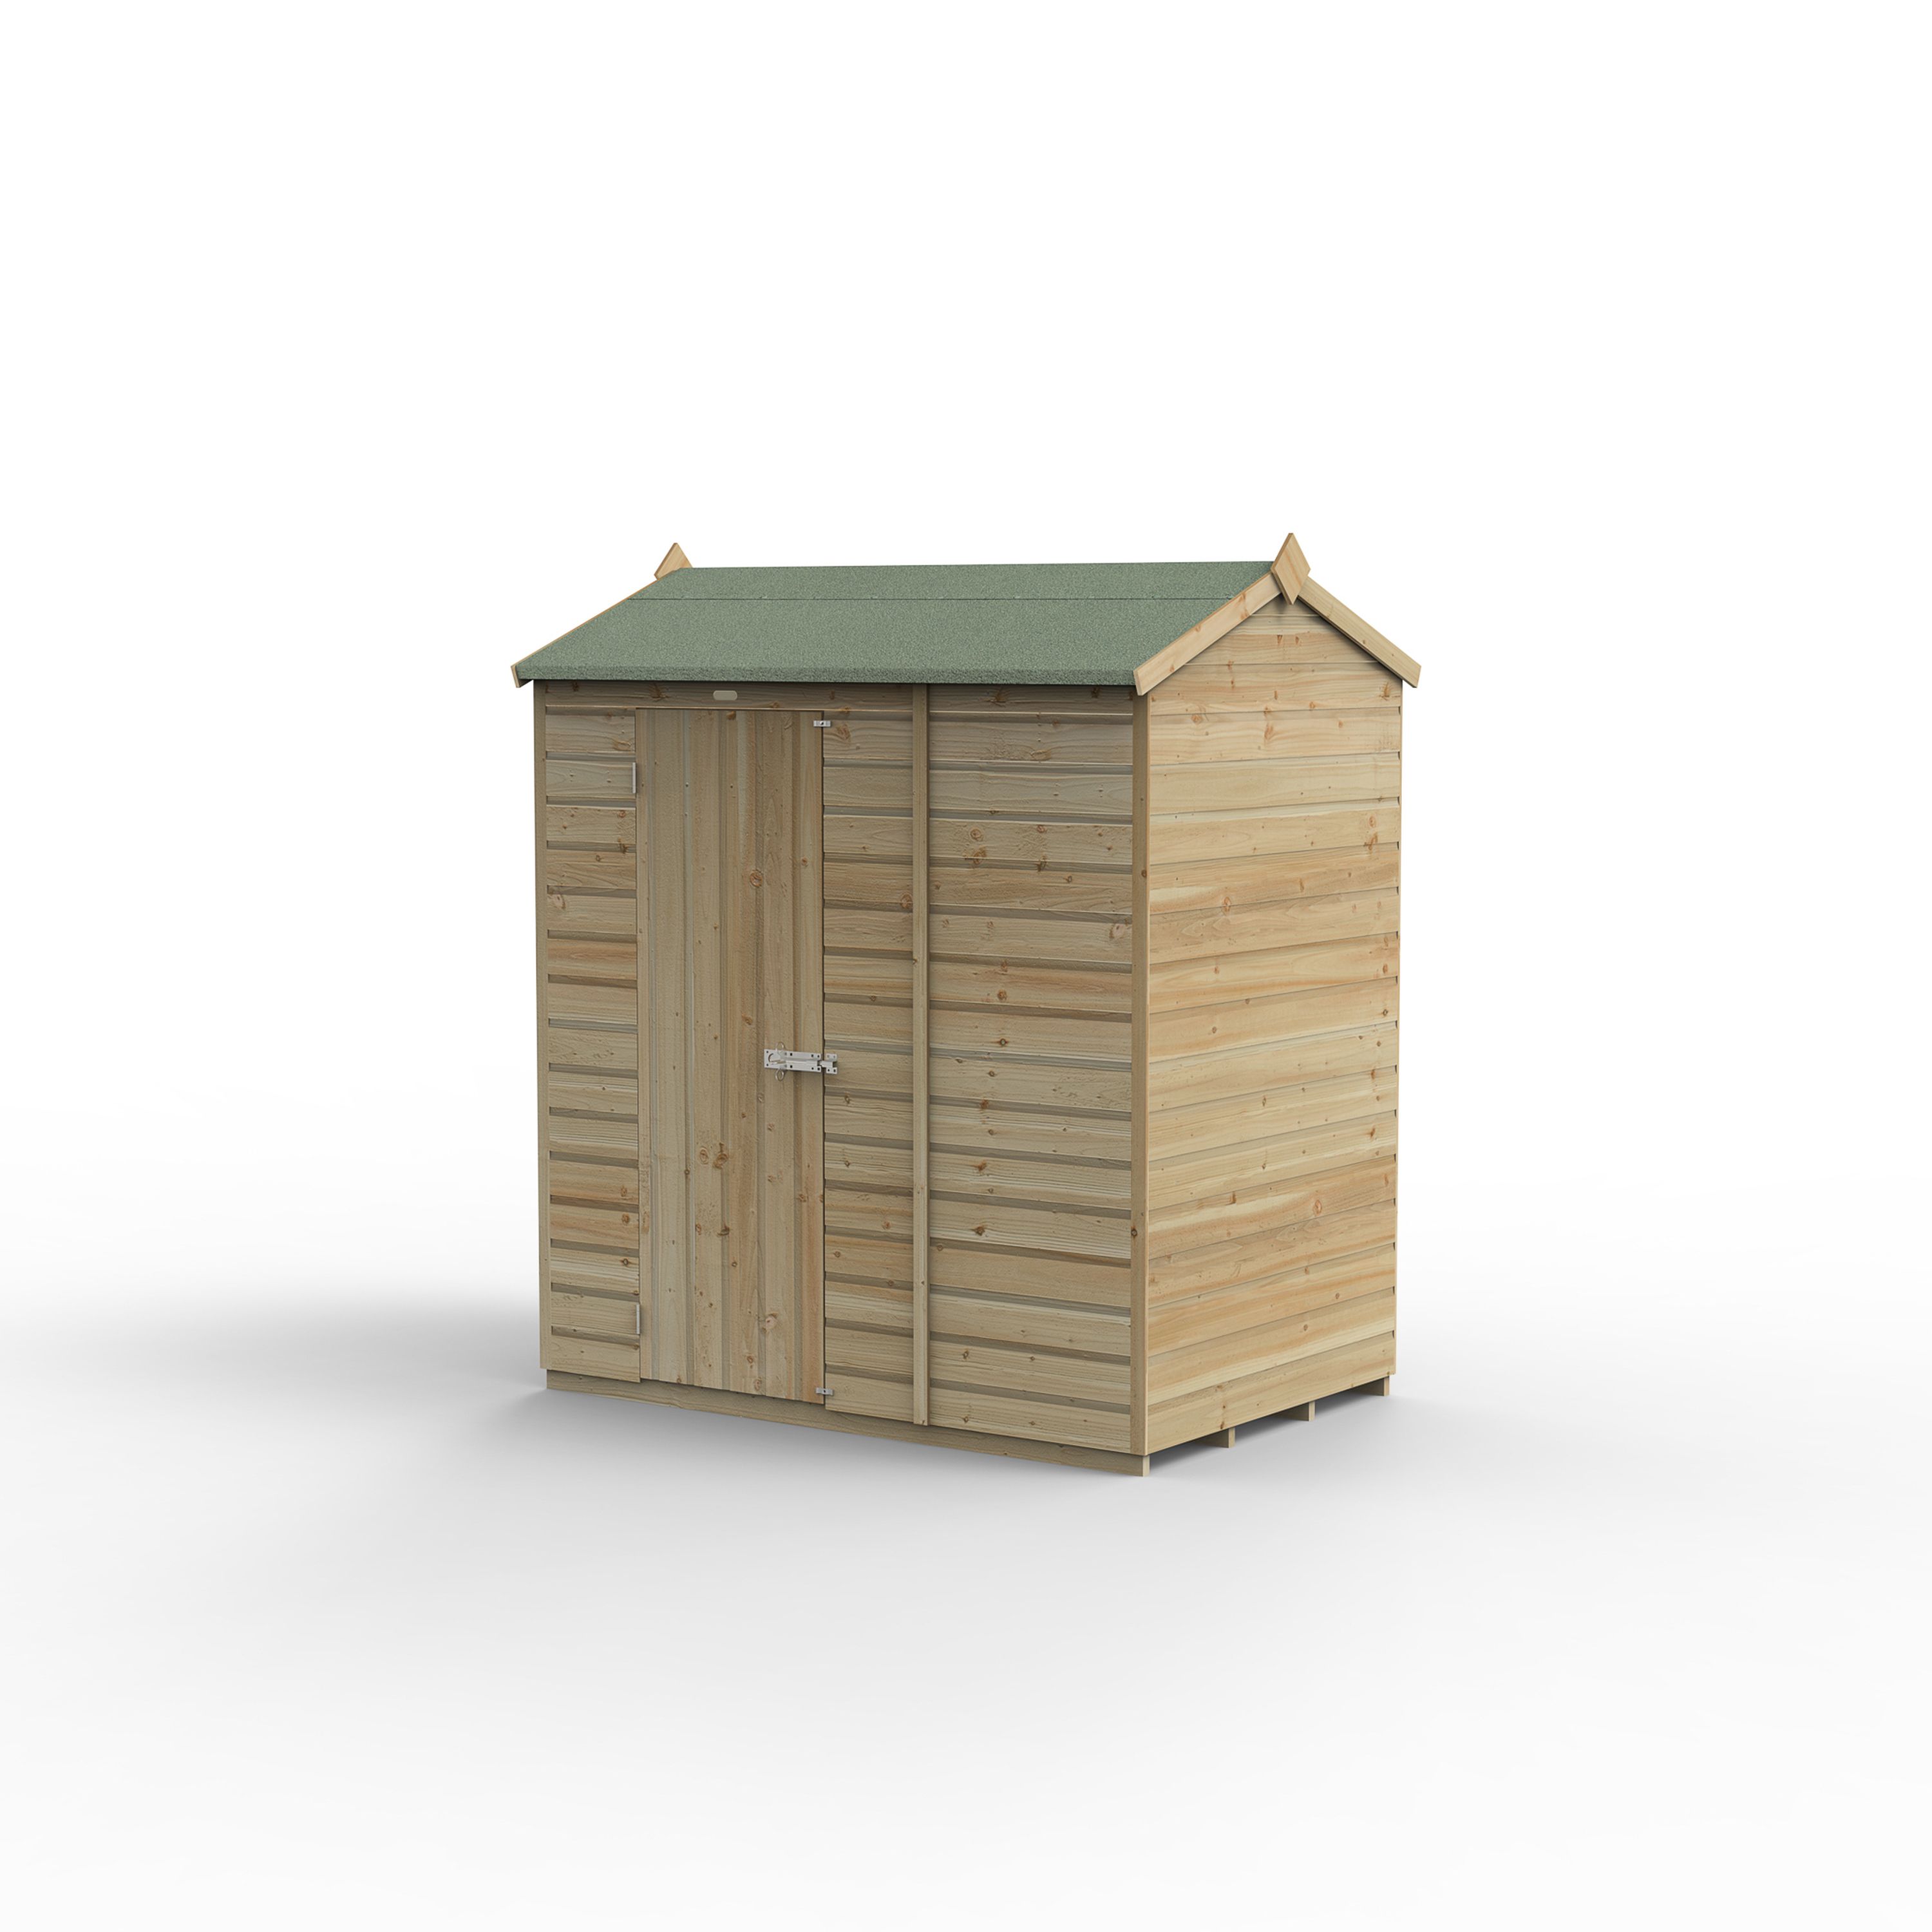 Forest Garden Beckwood 6x4 ft Reverse apex Natural timber Wooden Shed with floor (Base included) - Assembly not required